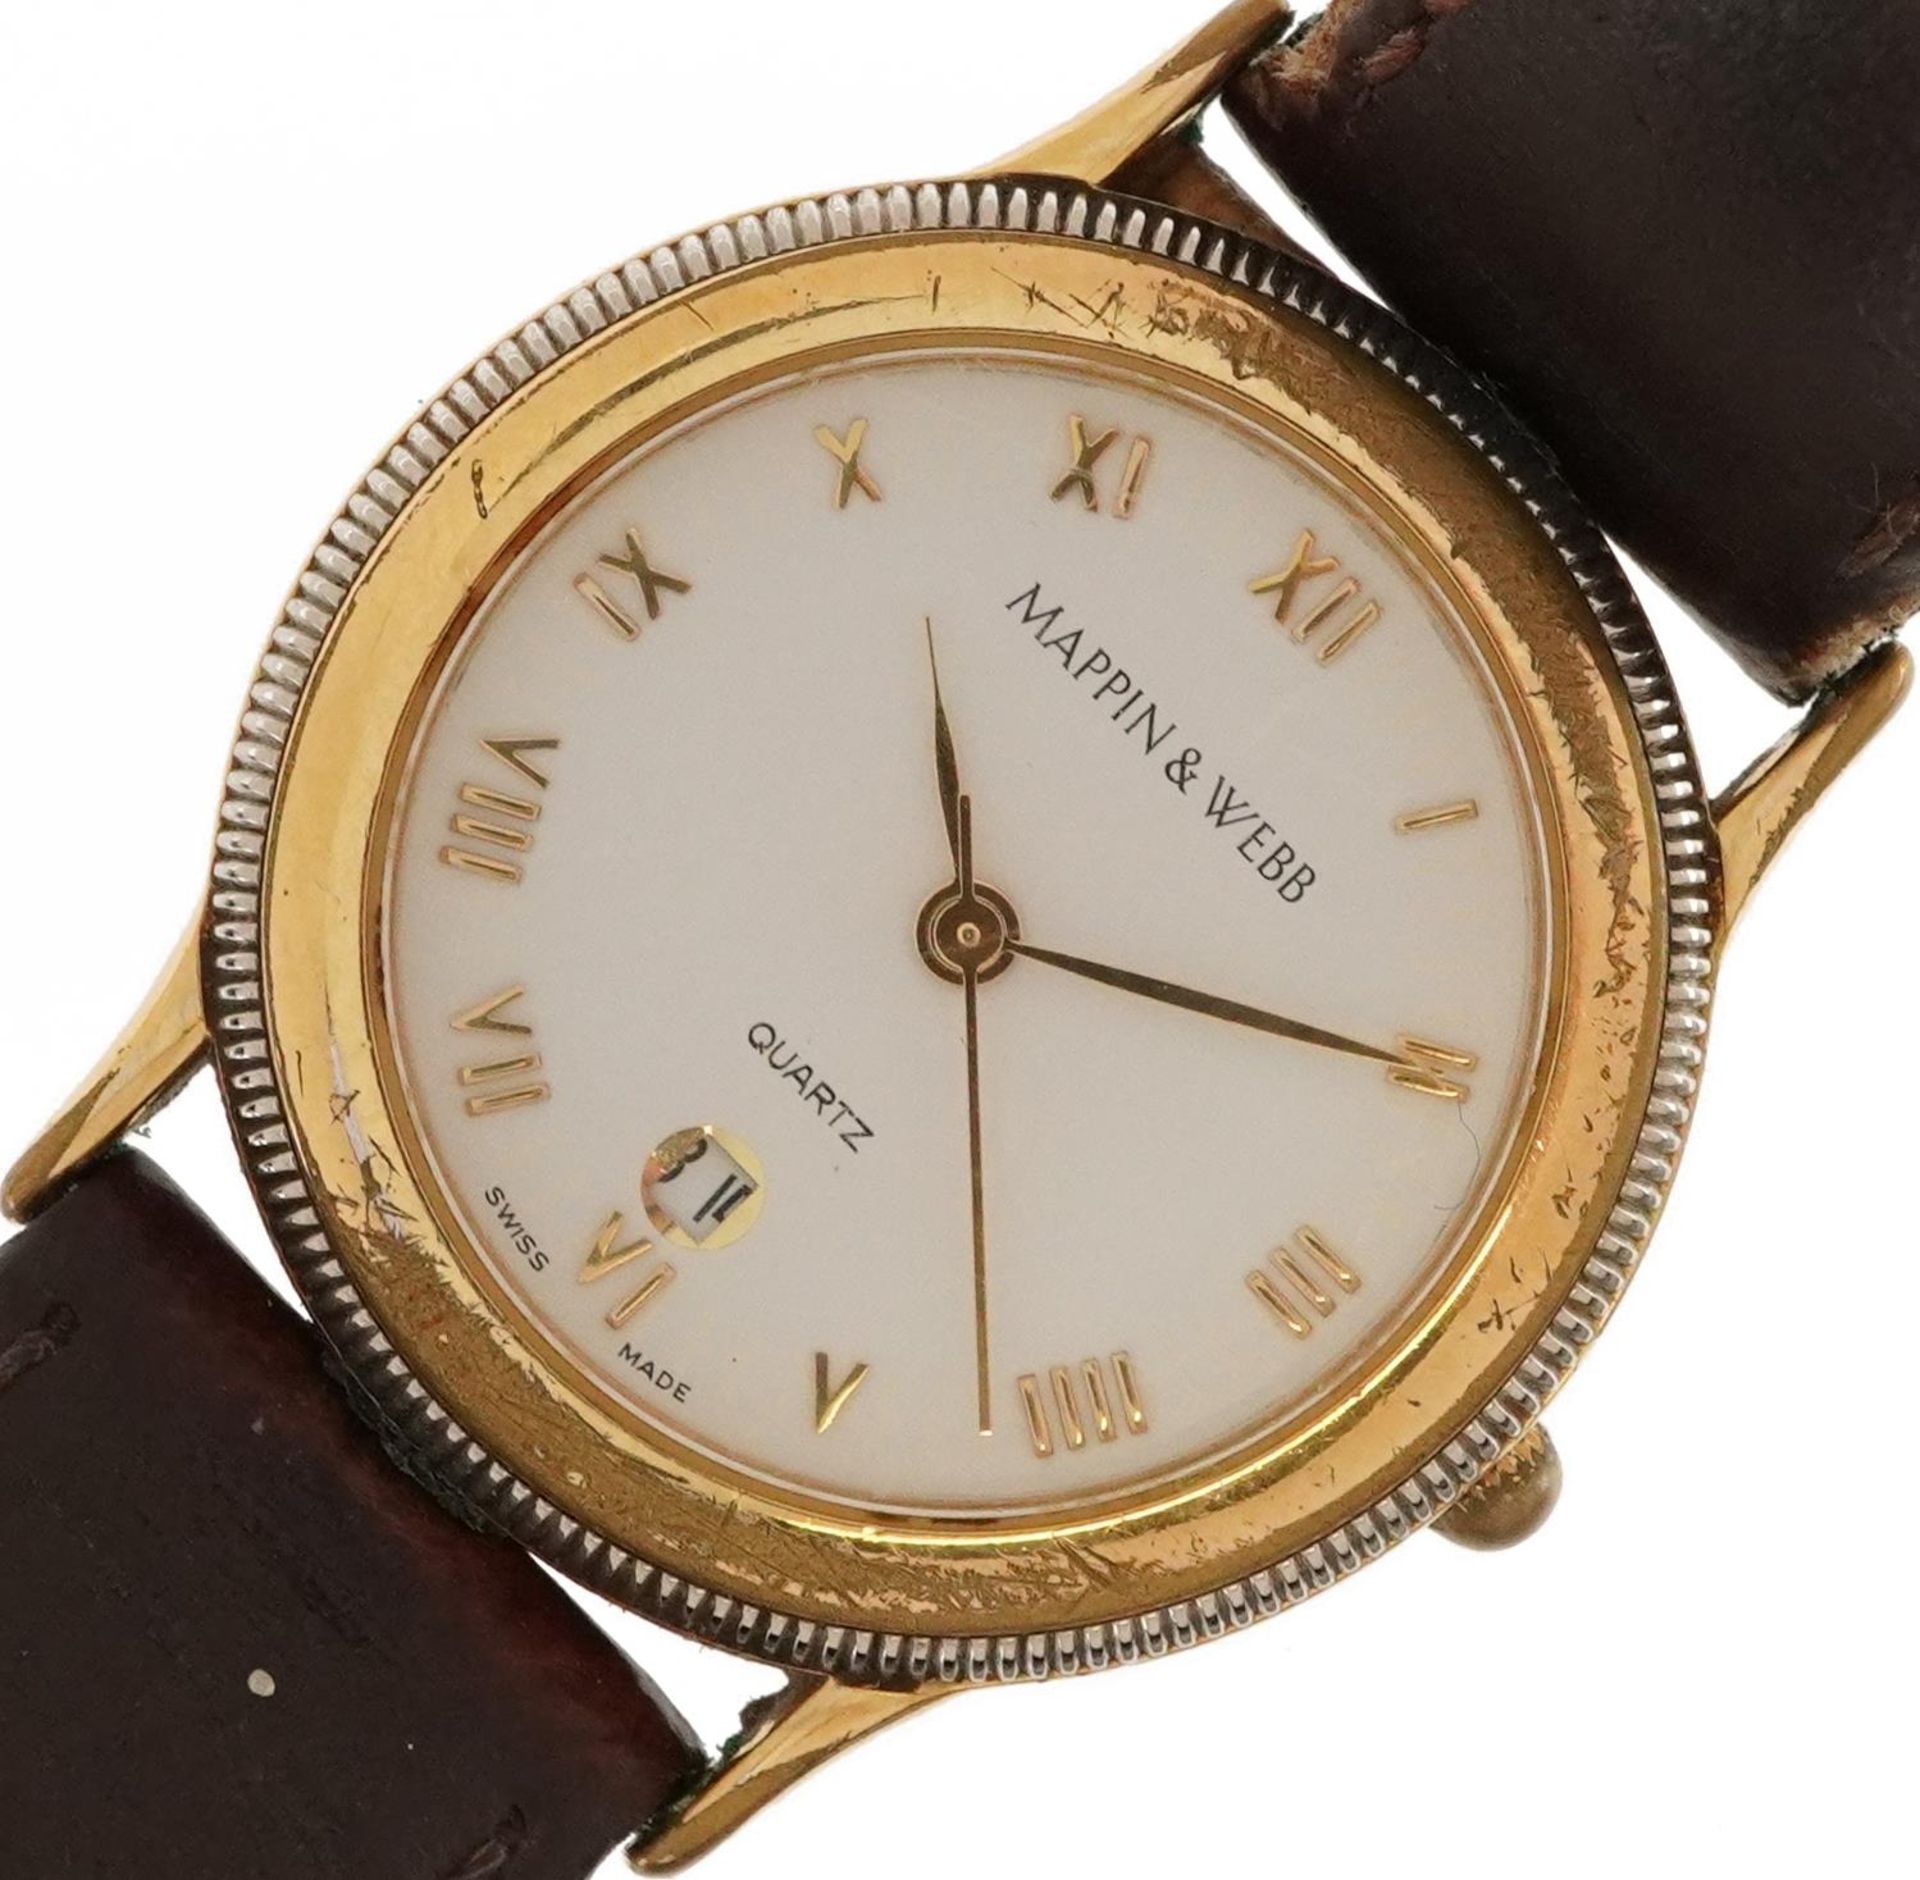 Mappin & Webb, ladies wristwatch with date aperture and box, 28mm in diameter